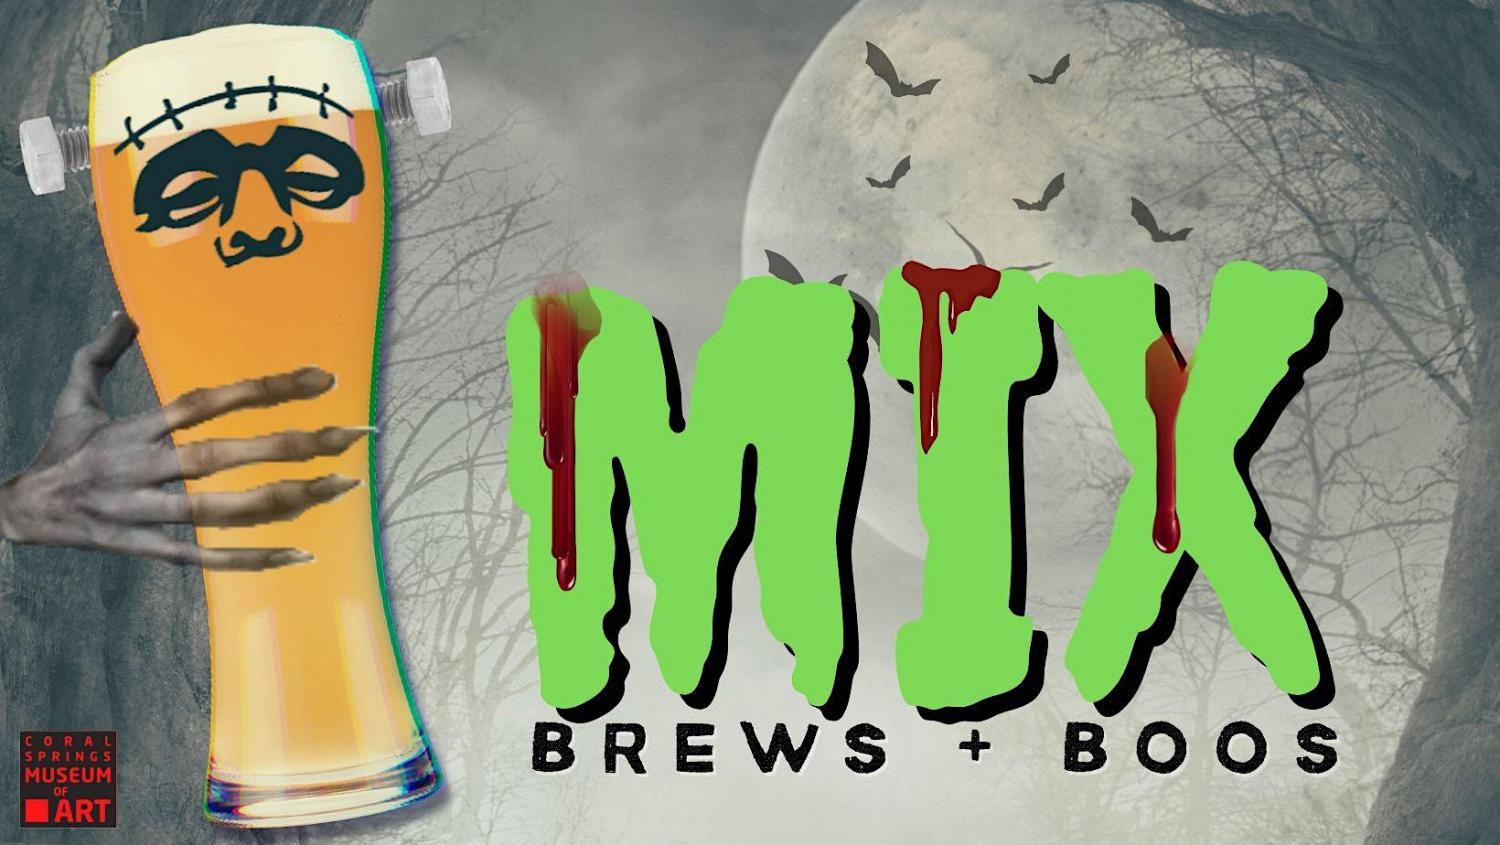 MIX: Brew + Boos and Movies Too!
Fri Oct 21, 7:00 PM - Fri Oct 21, 7:00 PM
in 2 days